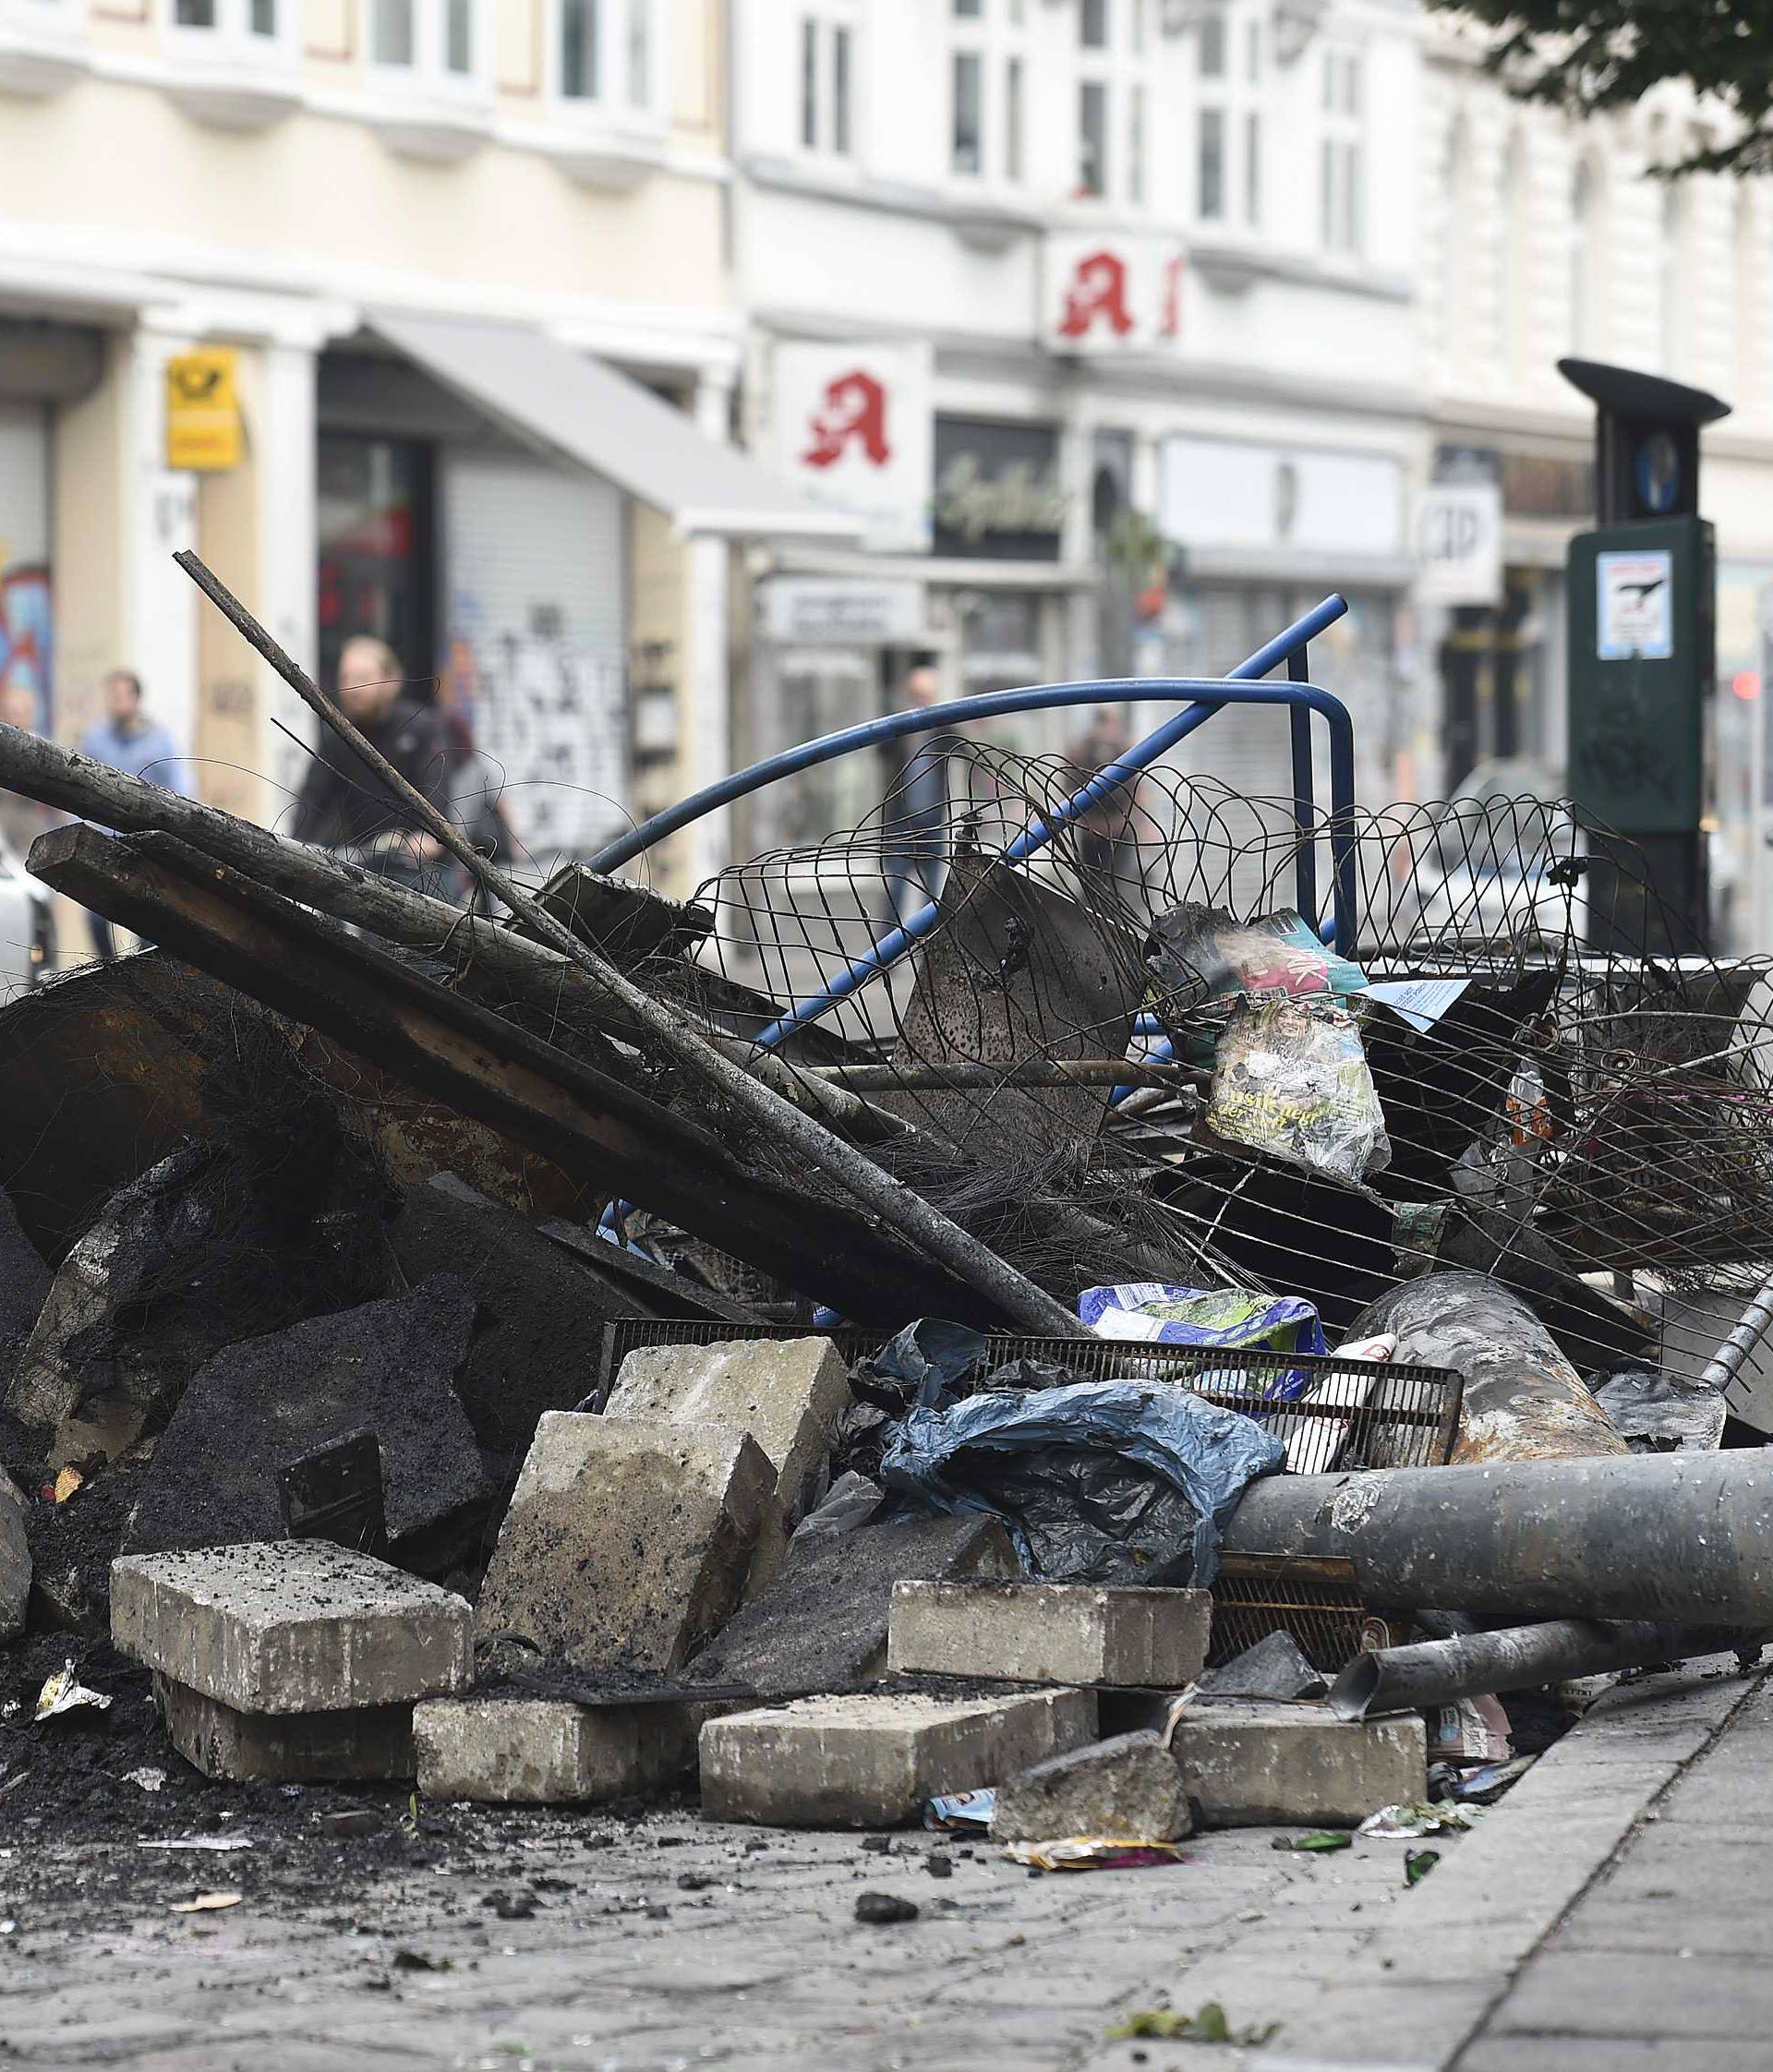 Damages are seen on a street after demonstrations at the G20 summit in Hamburg